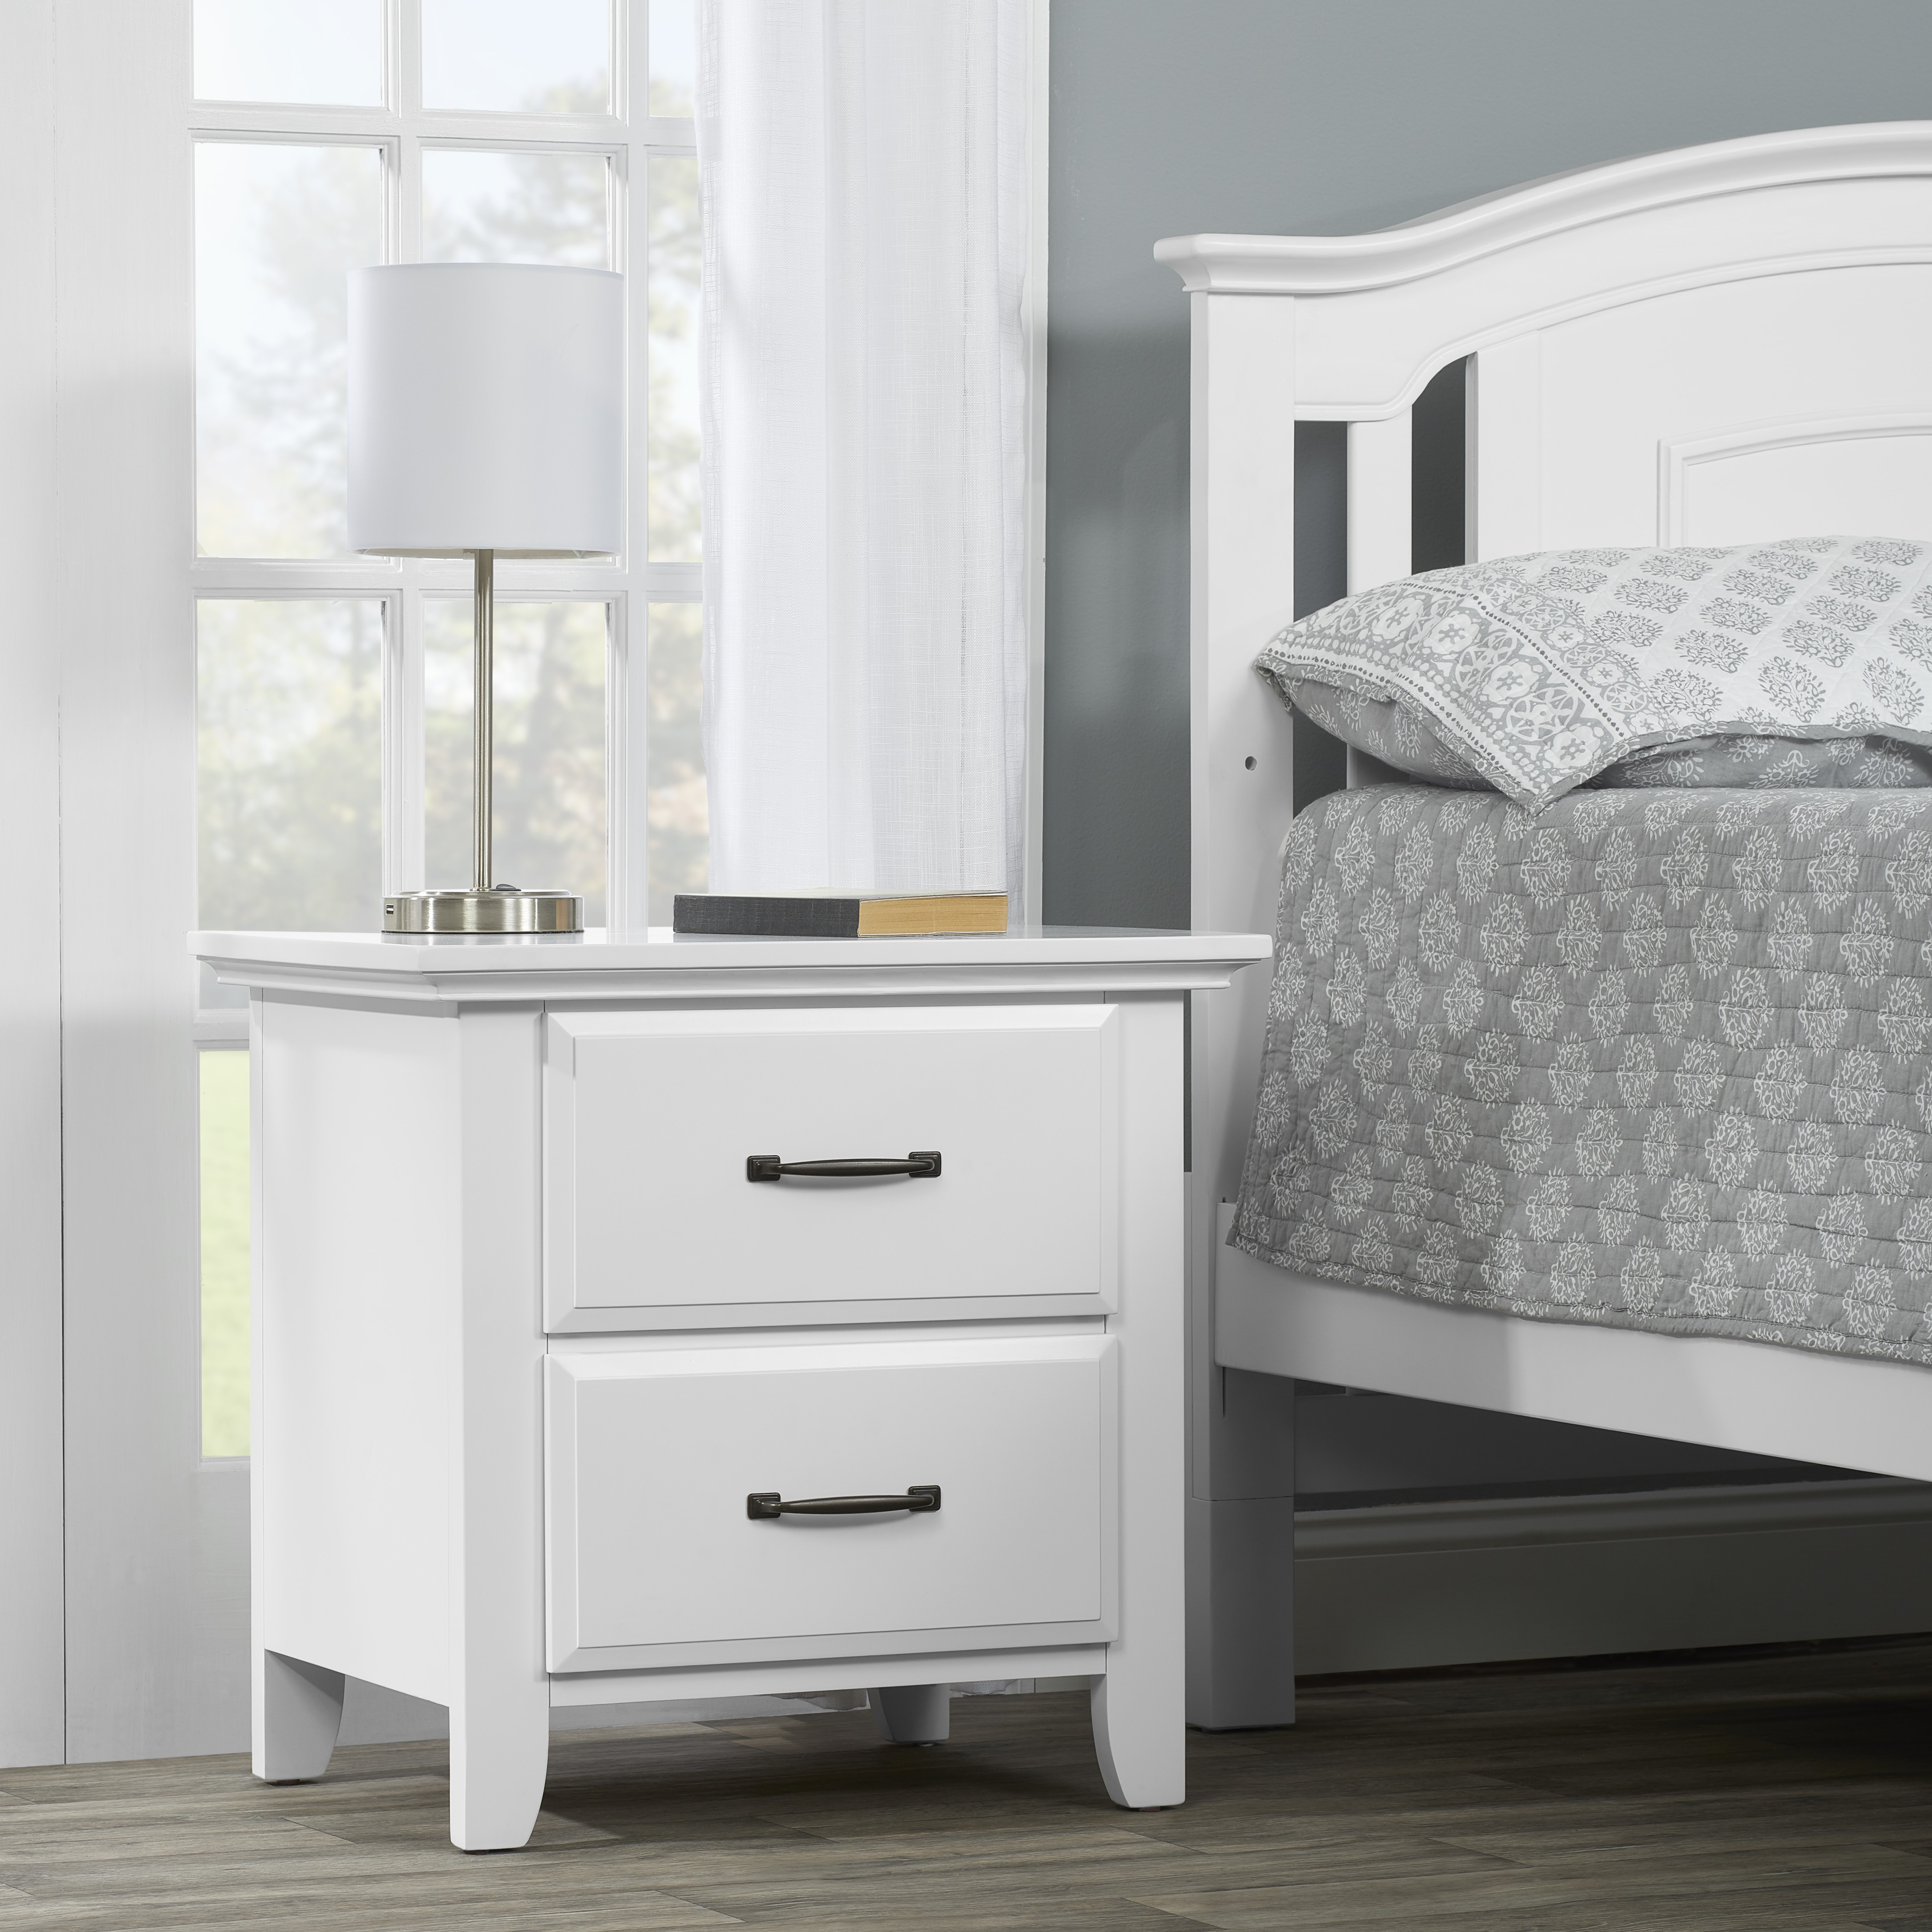 Oxford Baby Willowbrook 2-Drawer Nightstand, White - image 4 of 5